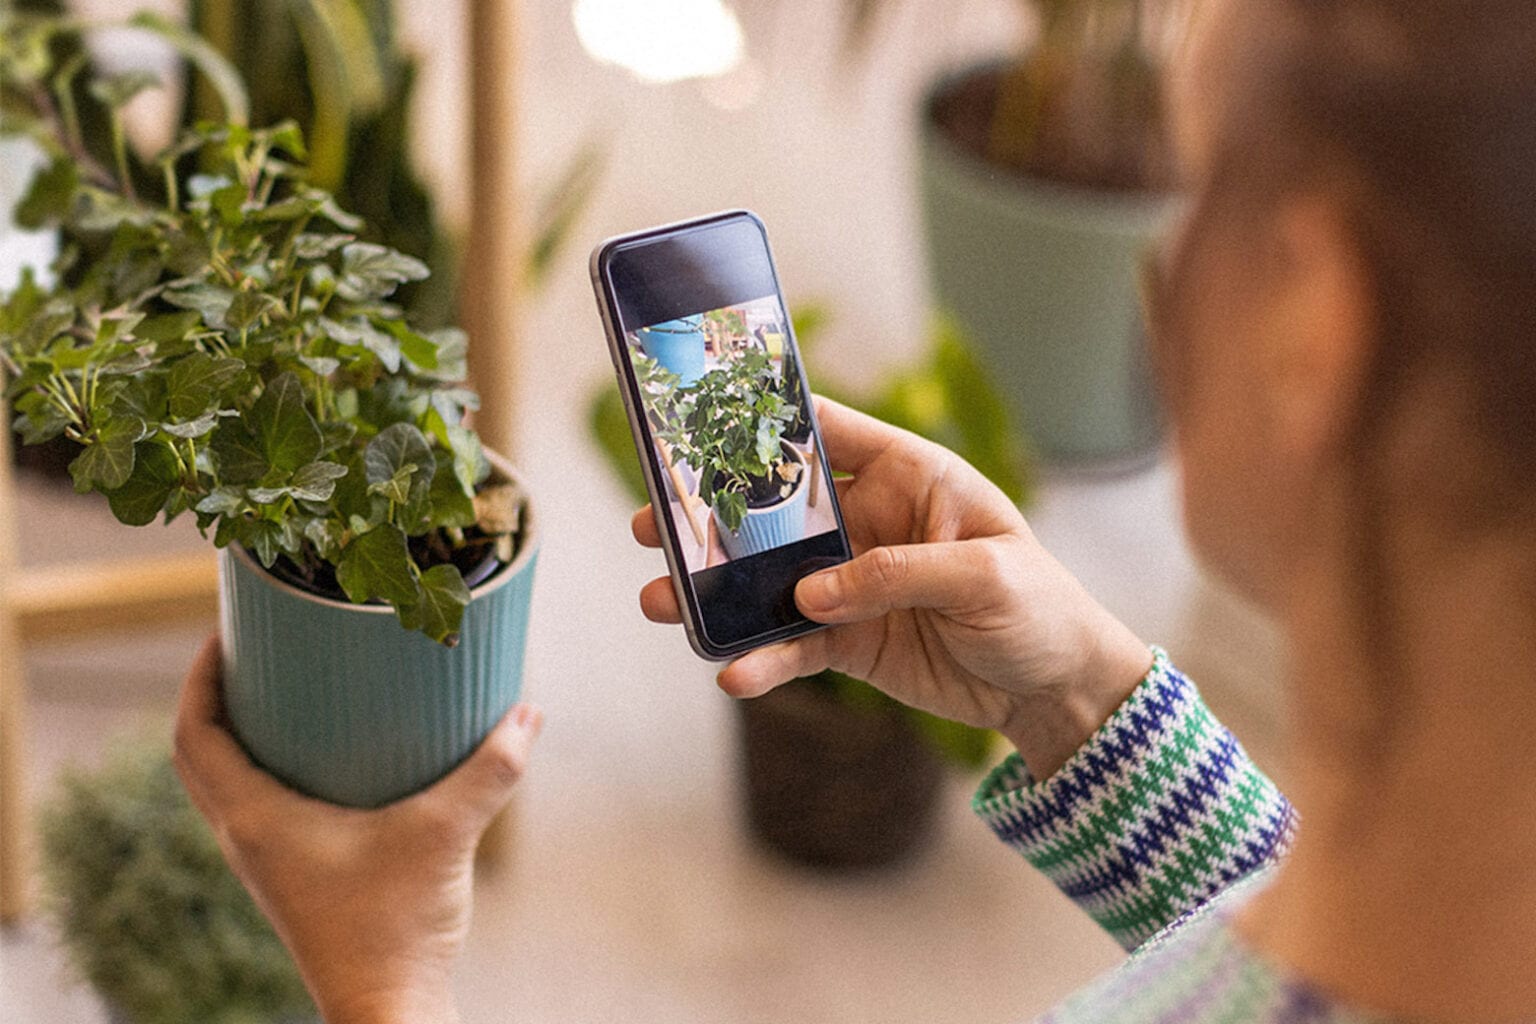 Let your gardening skills bloom with this plant ID app.